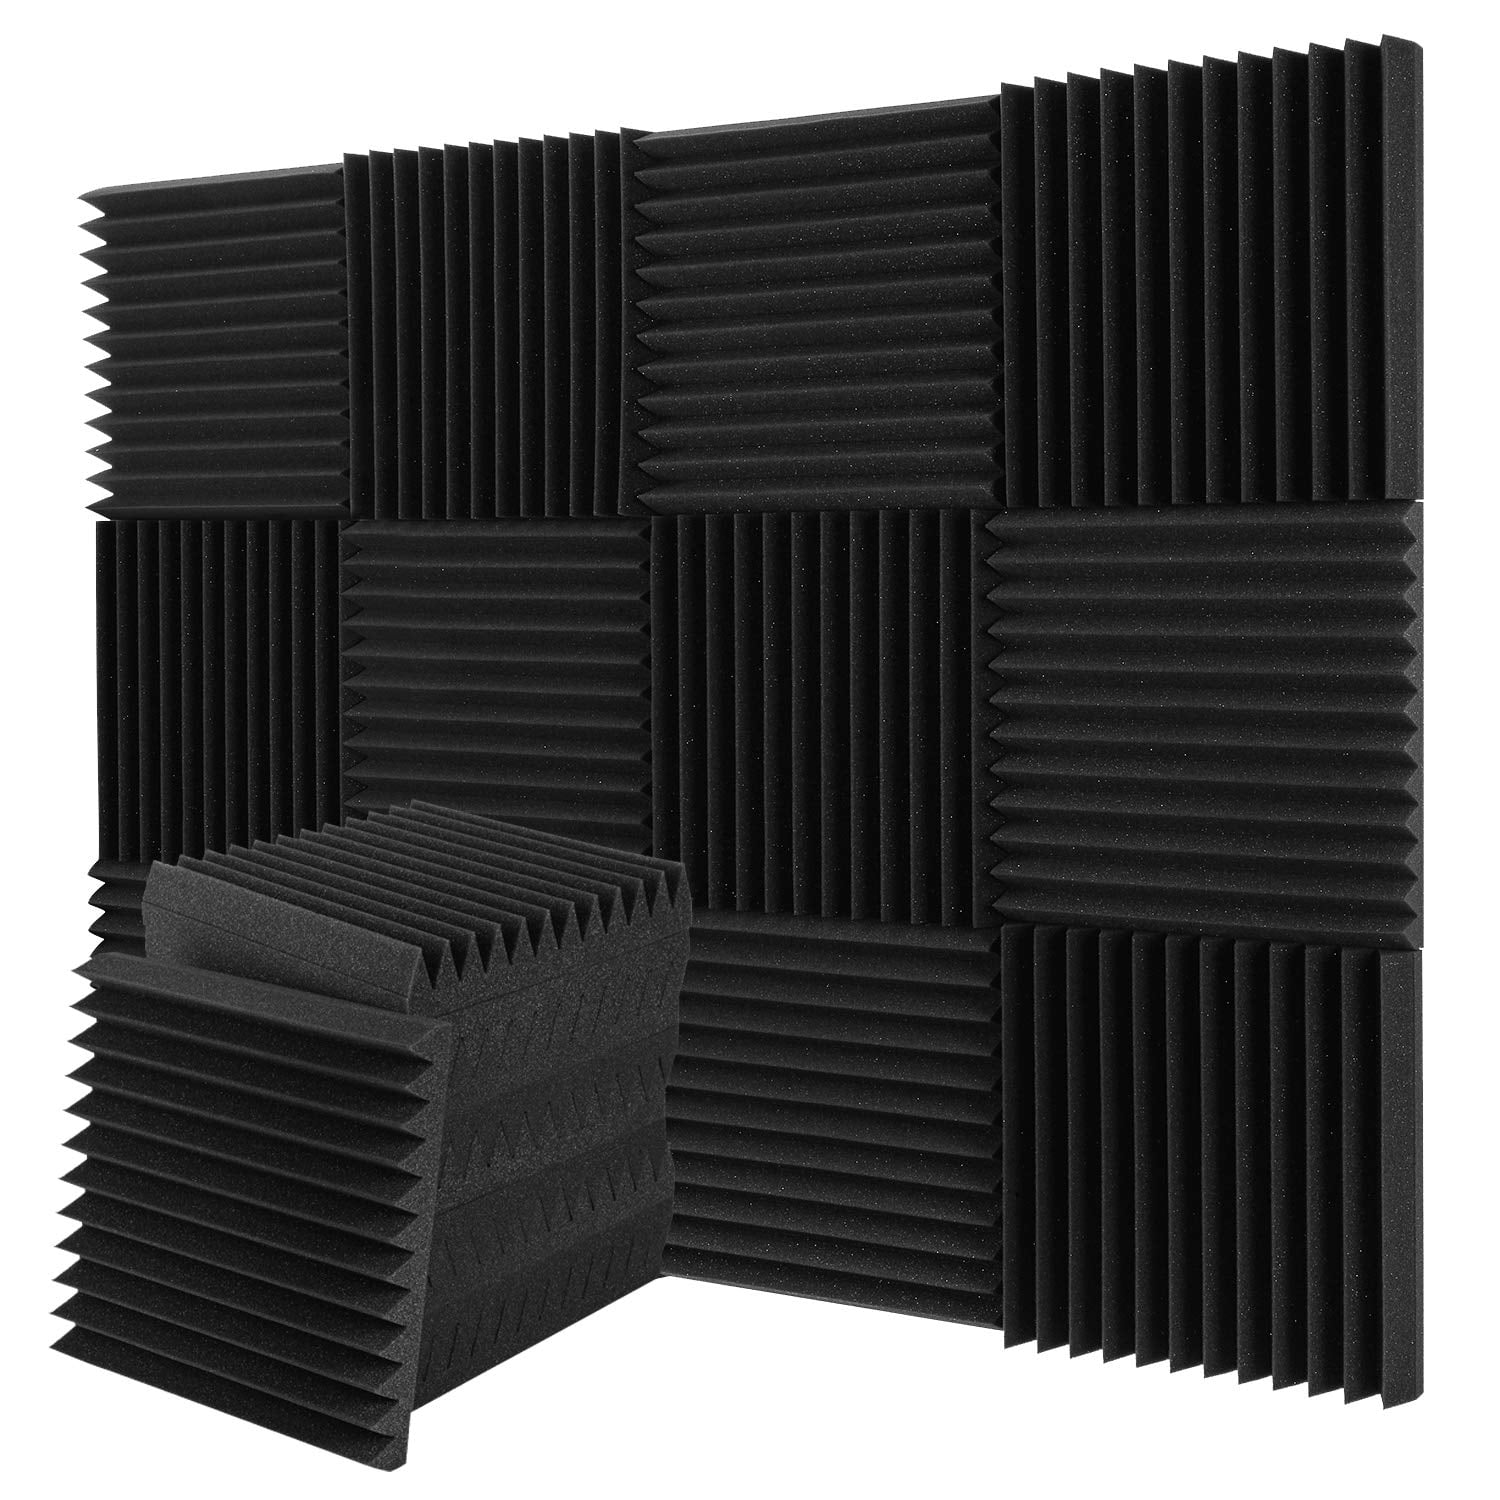 Sound Insulation Boards Pink Noise Reduction Adhesive Mounting Soundproof Panels for Home Offices for Recording Studios 